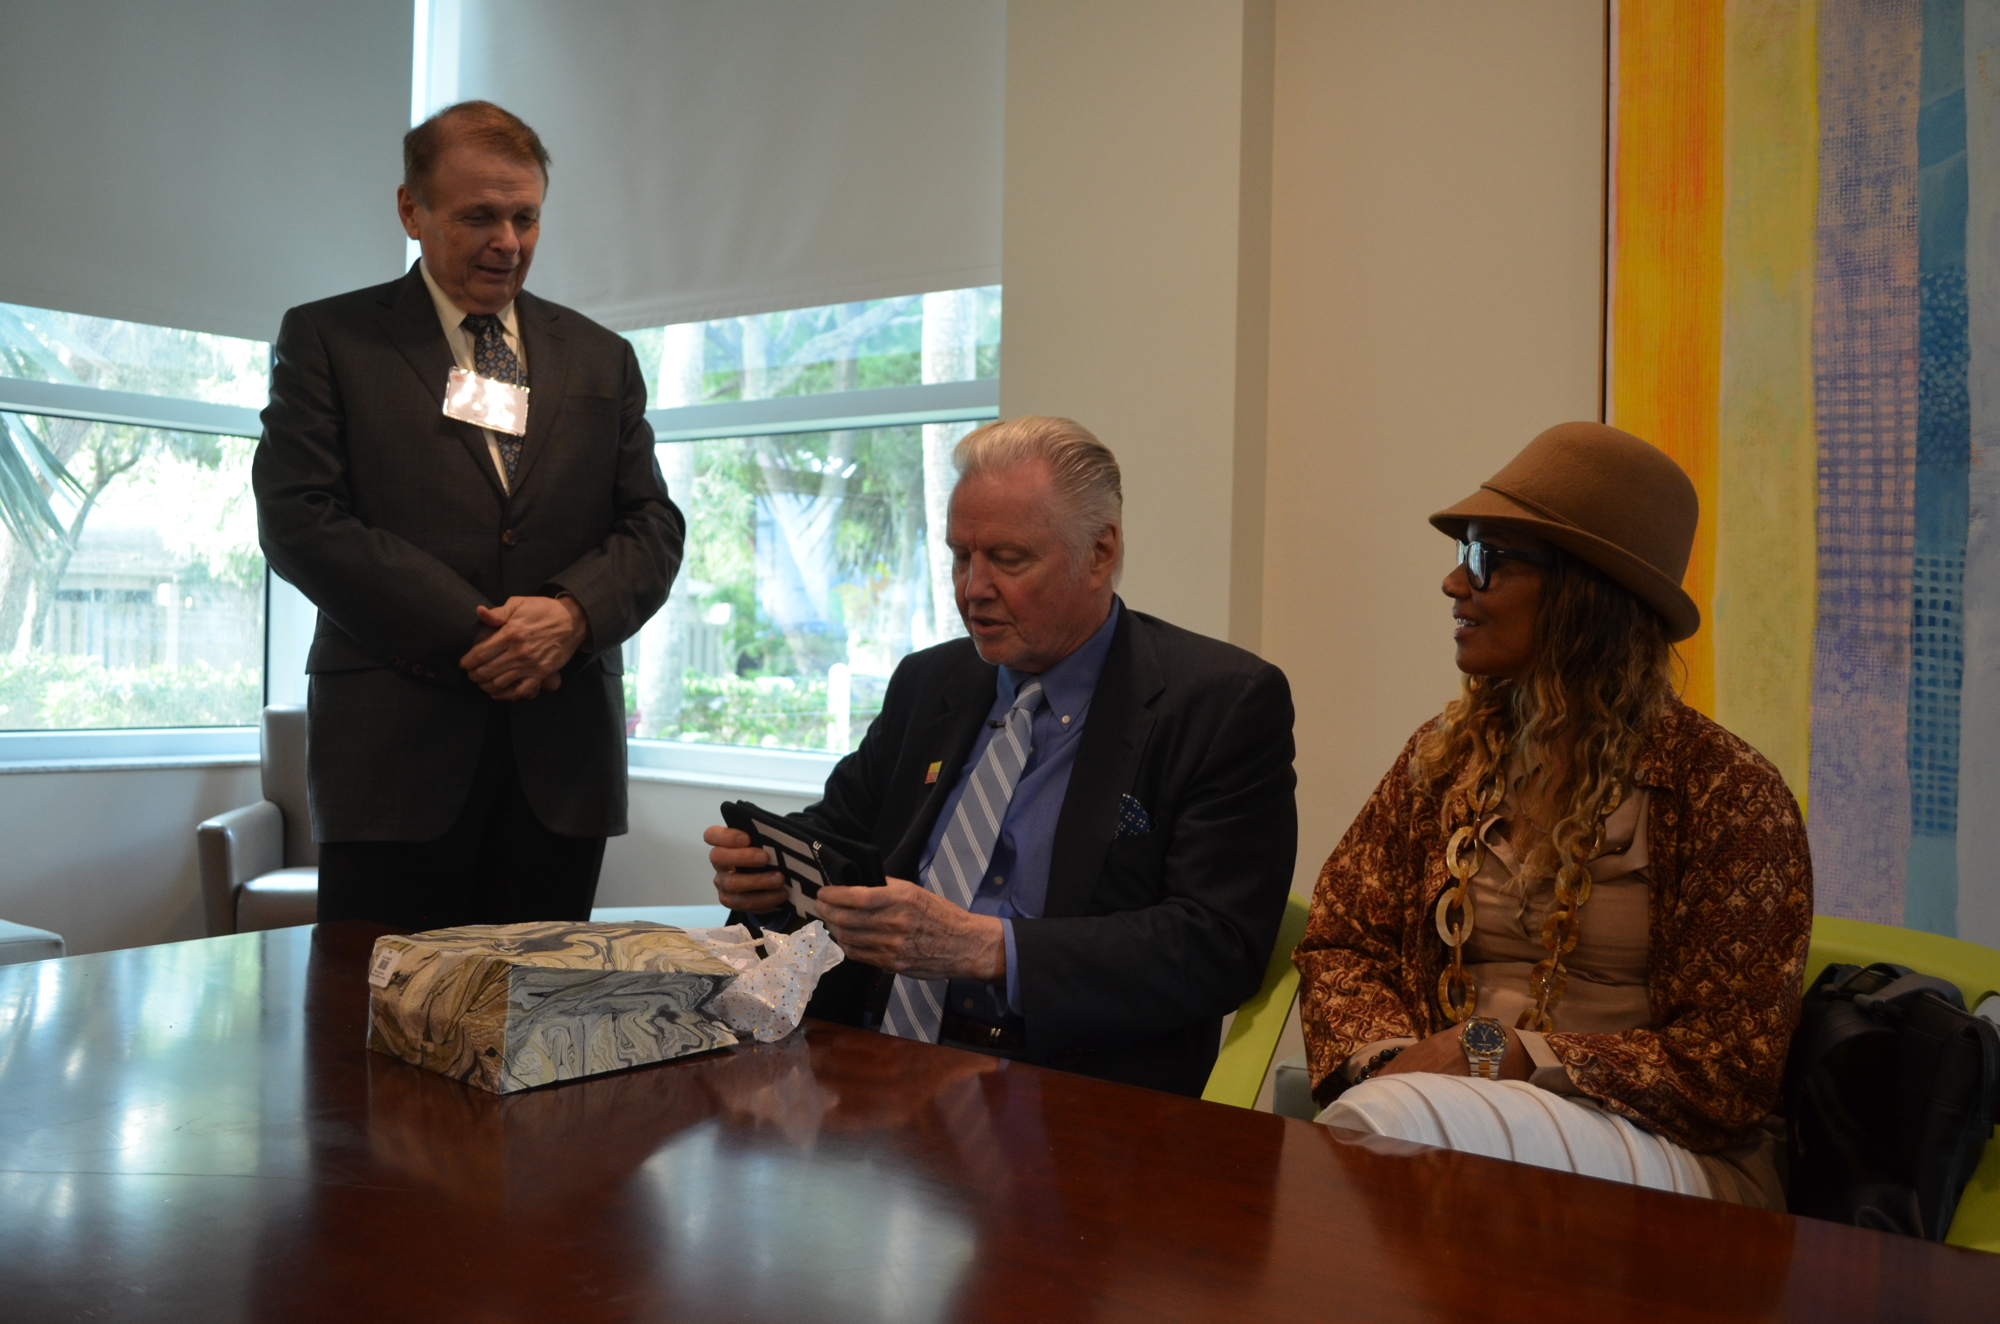 Larry Thompson presents Jon Voight with a gift on behalf of the college.